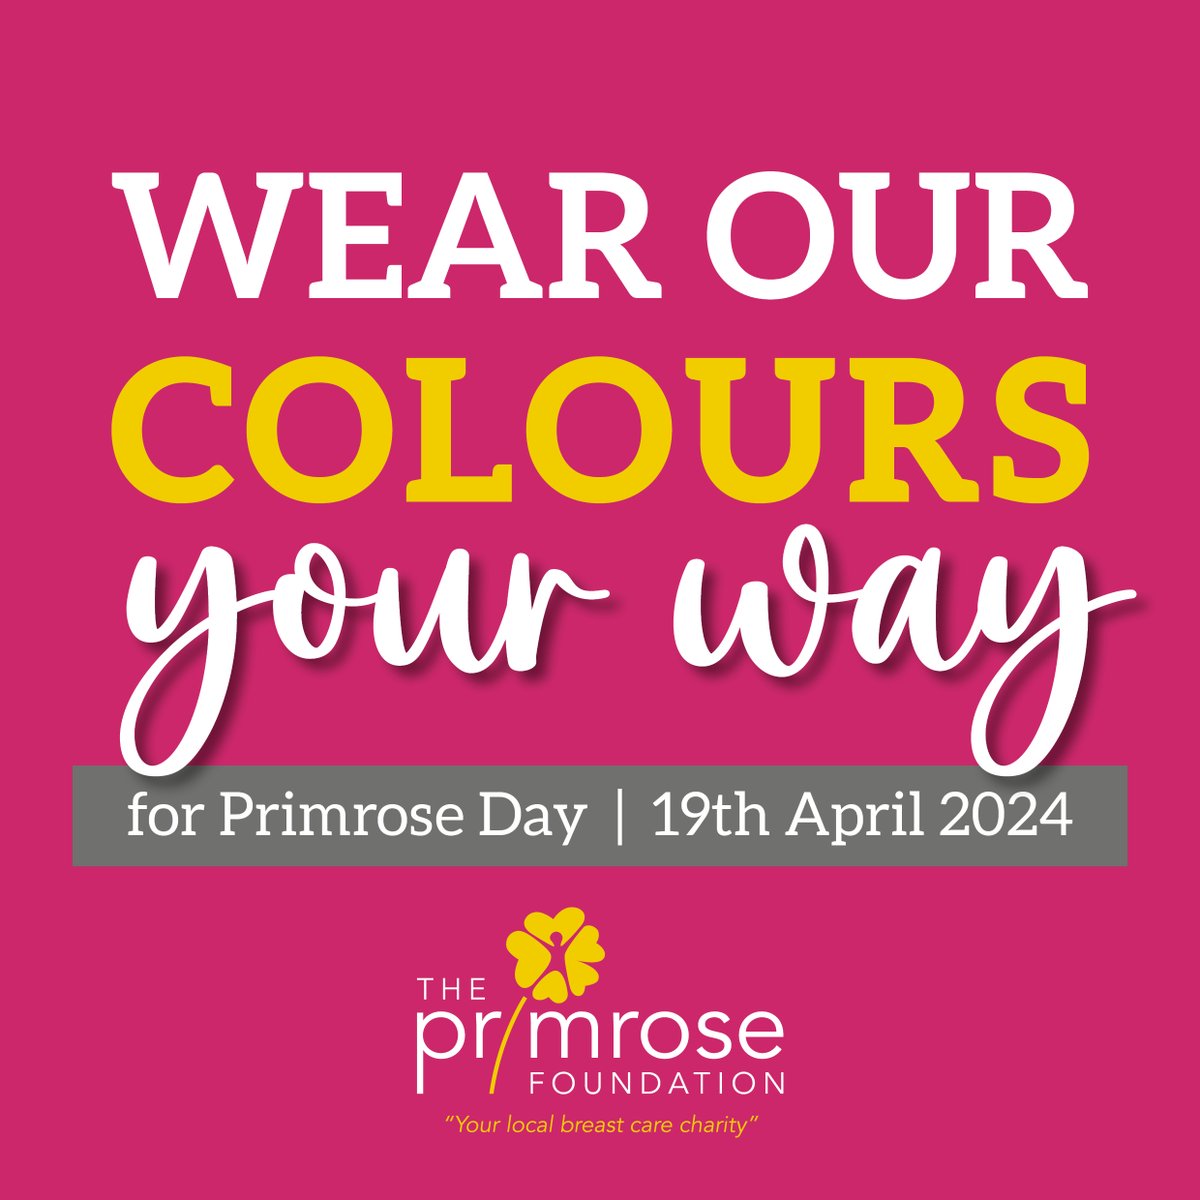 To celebrate our Anniversary, we are inviting everyone to get involved in our annual Primrose Day by wearing pink, yellow, or grey for the day. primrosefoundation.org/support-and-ev… #charityevent #happyanniversary #primroseday #getinvolved #fridayvibes #followfriday #fridayfeeling